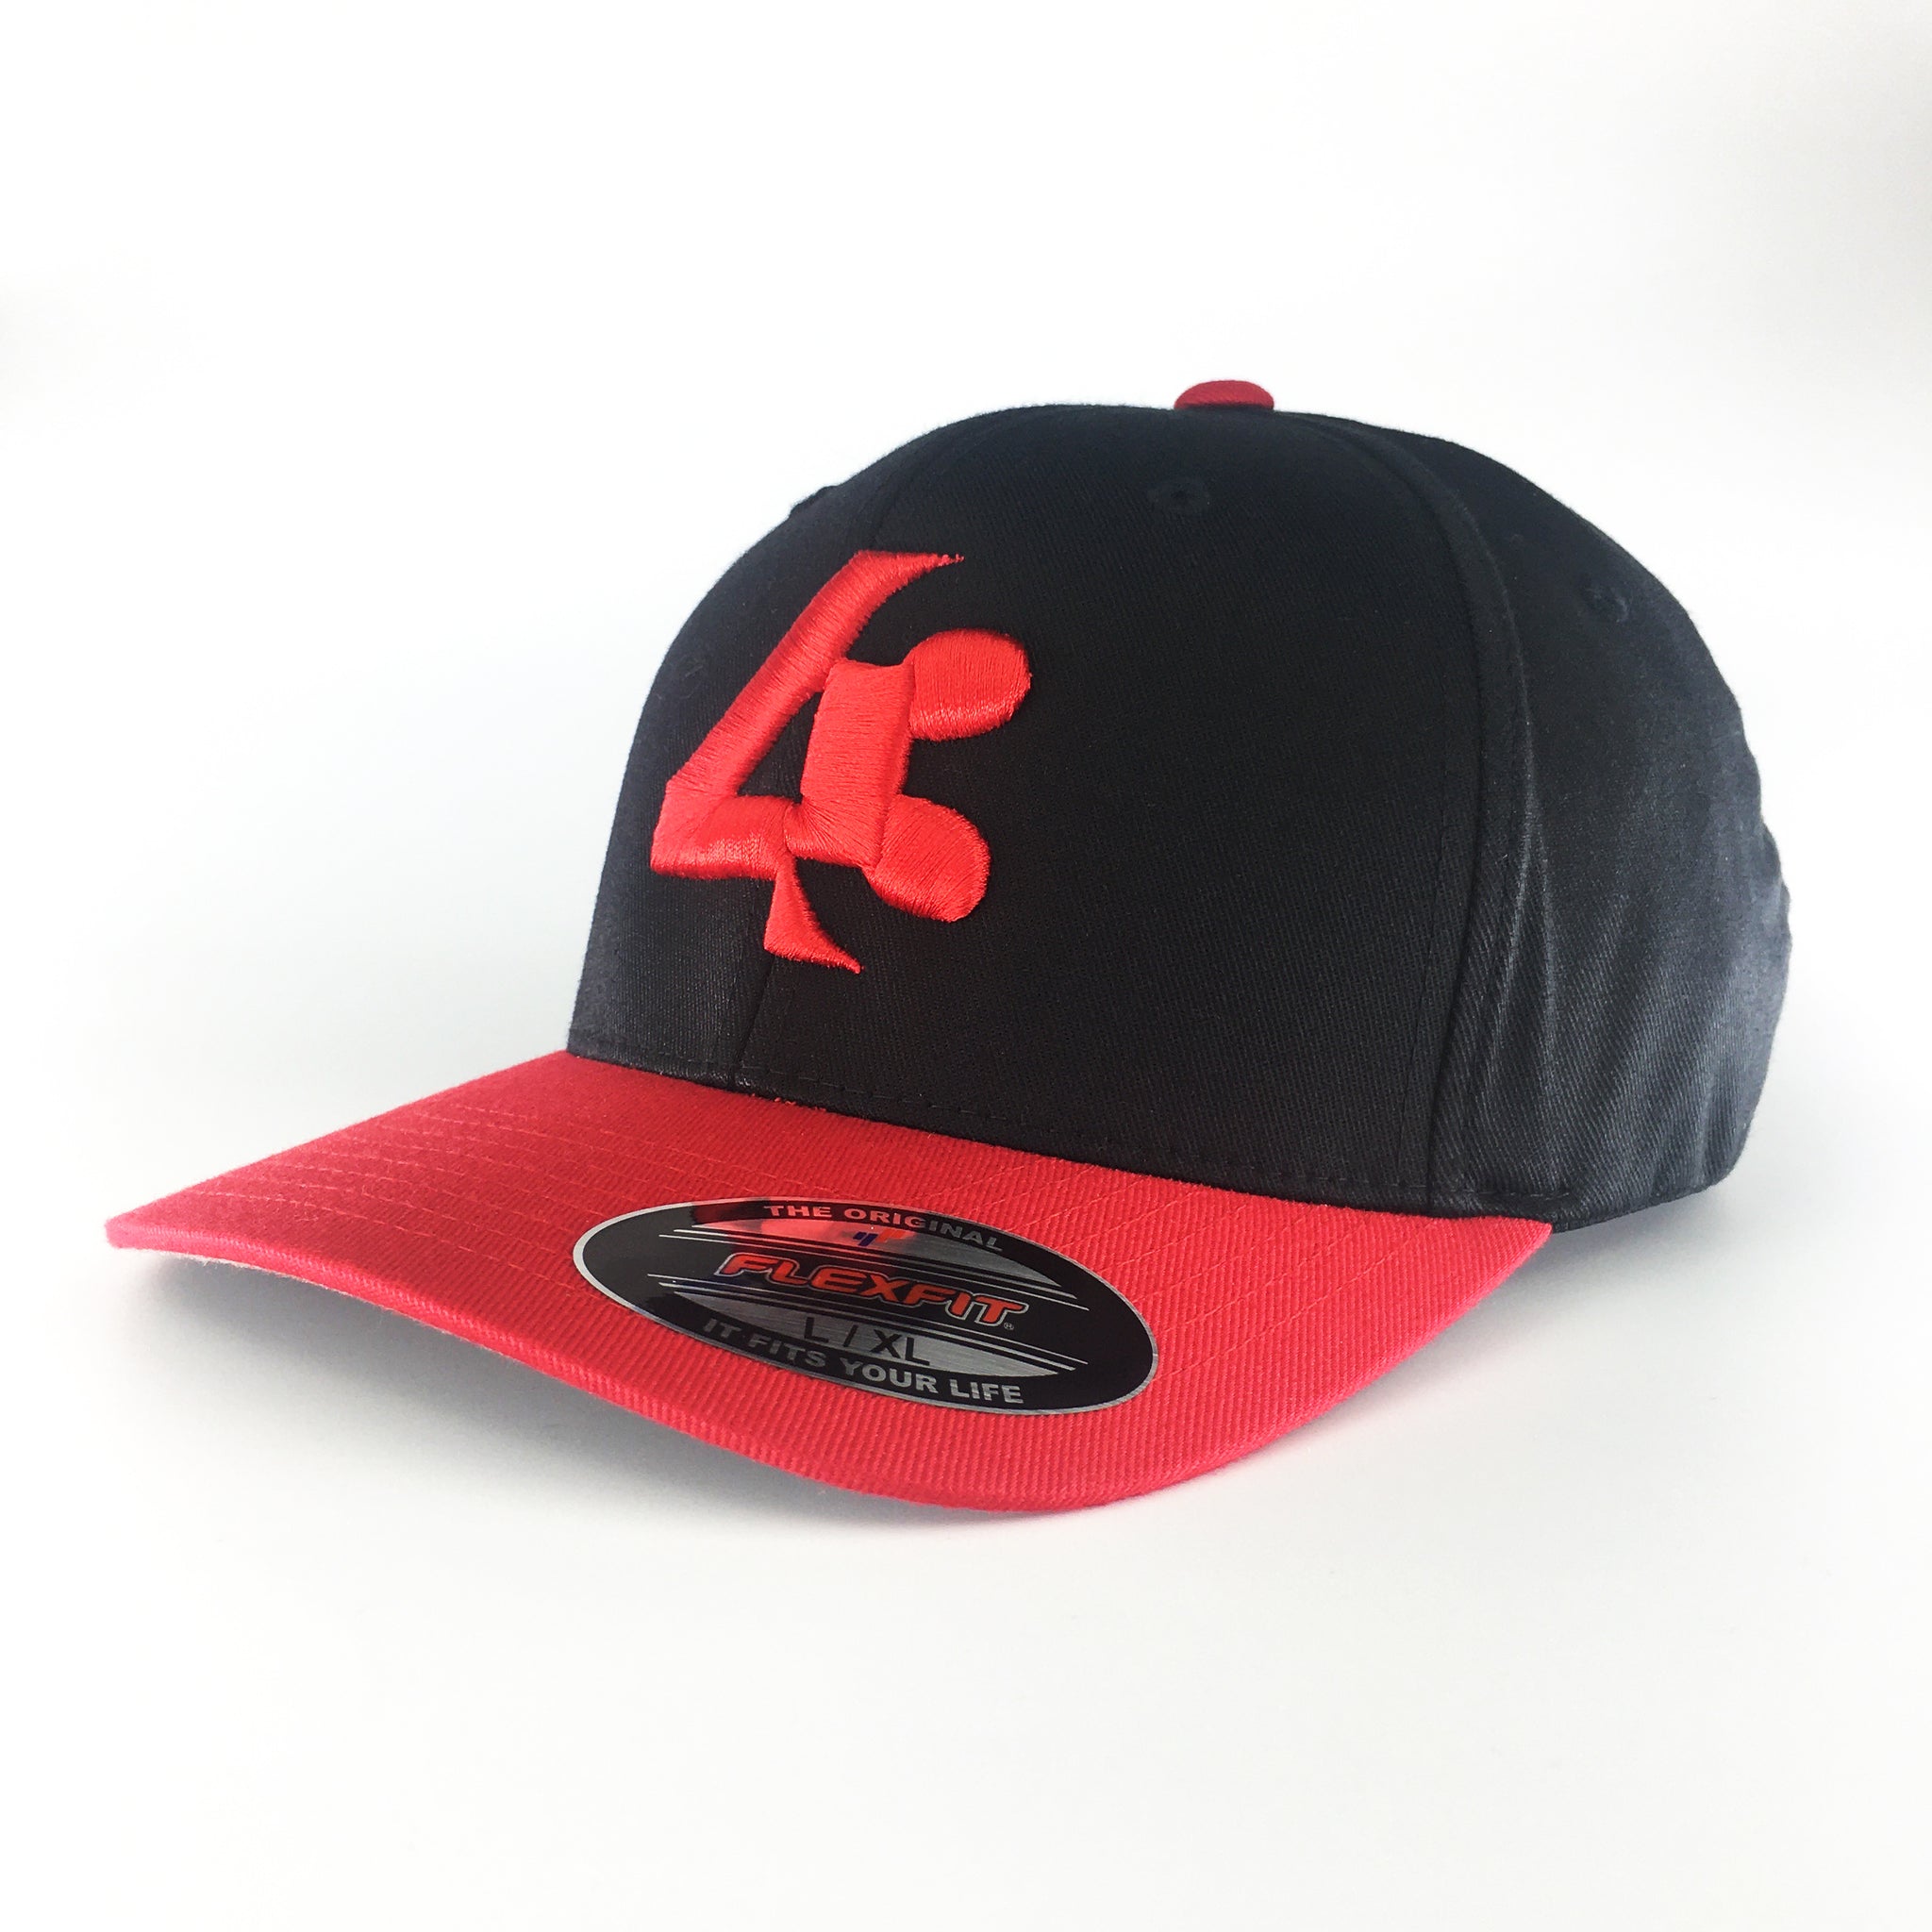 Fitted toned Black – 43 USA FortyThree™ Flexfit and Red two